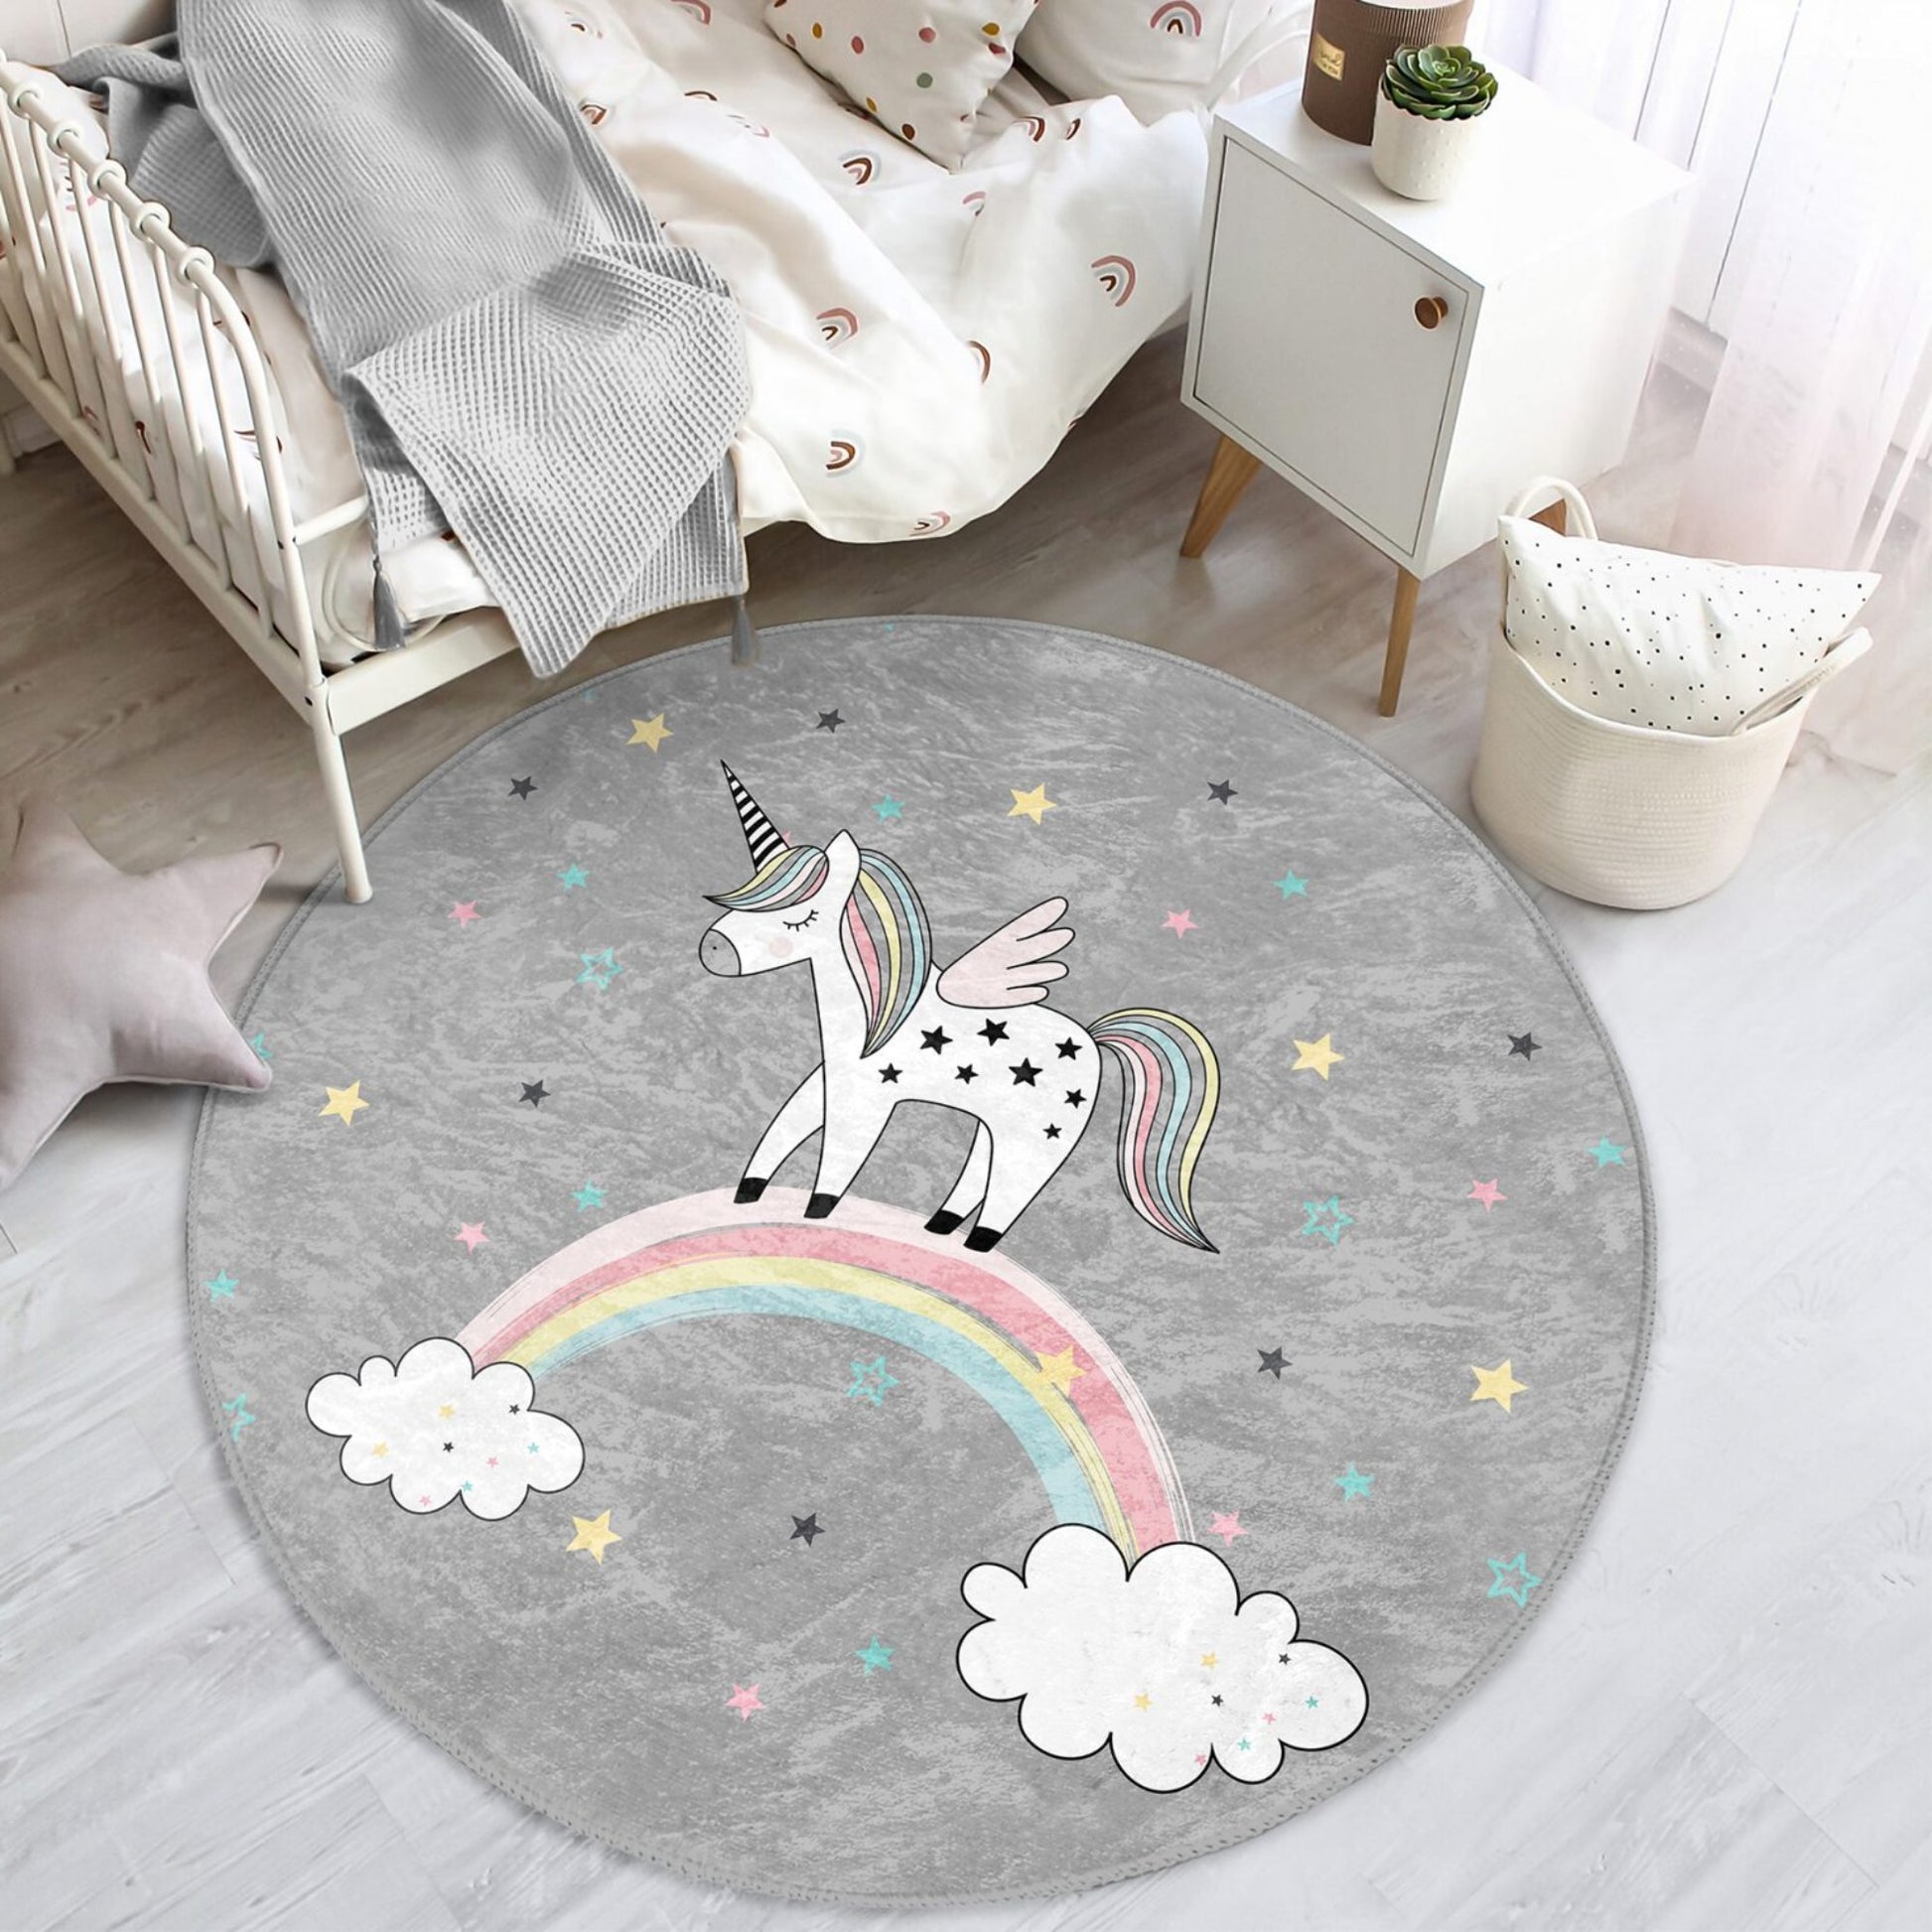 Round Unicorn on the Rainbow Patterned Floor Rug - Charming Accent